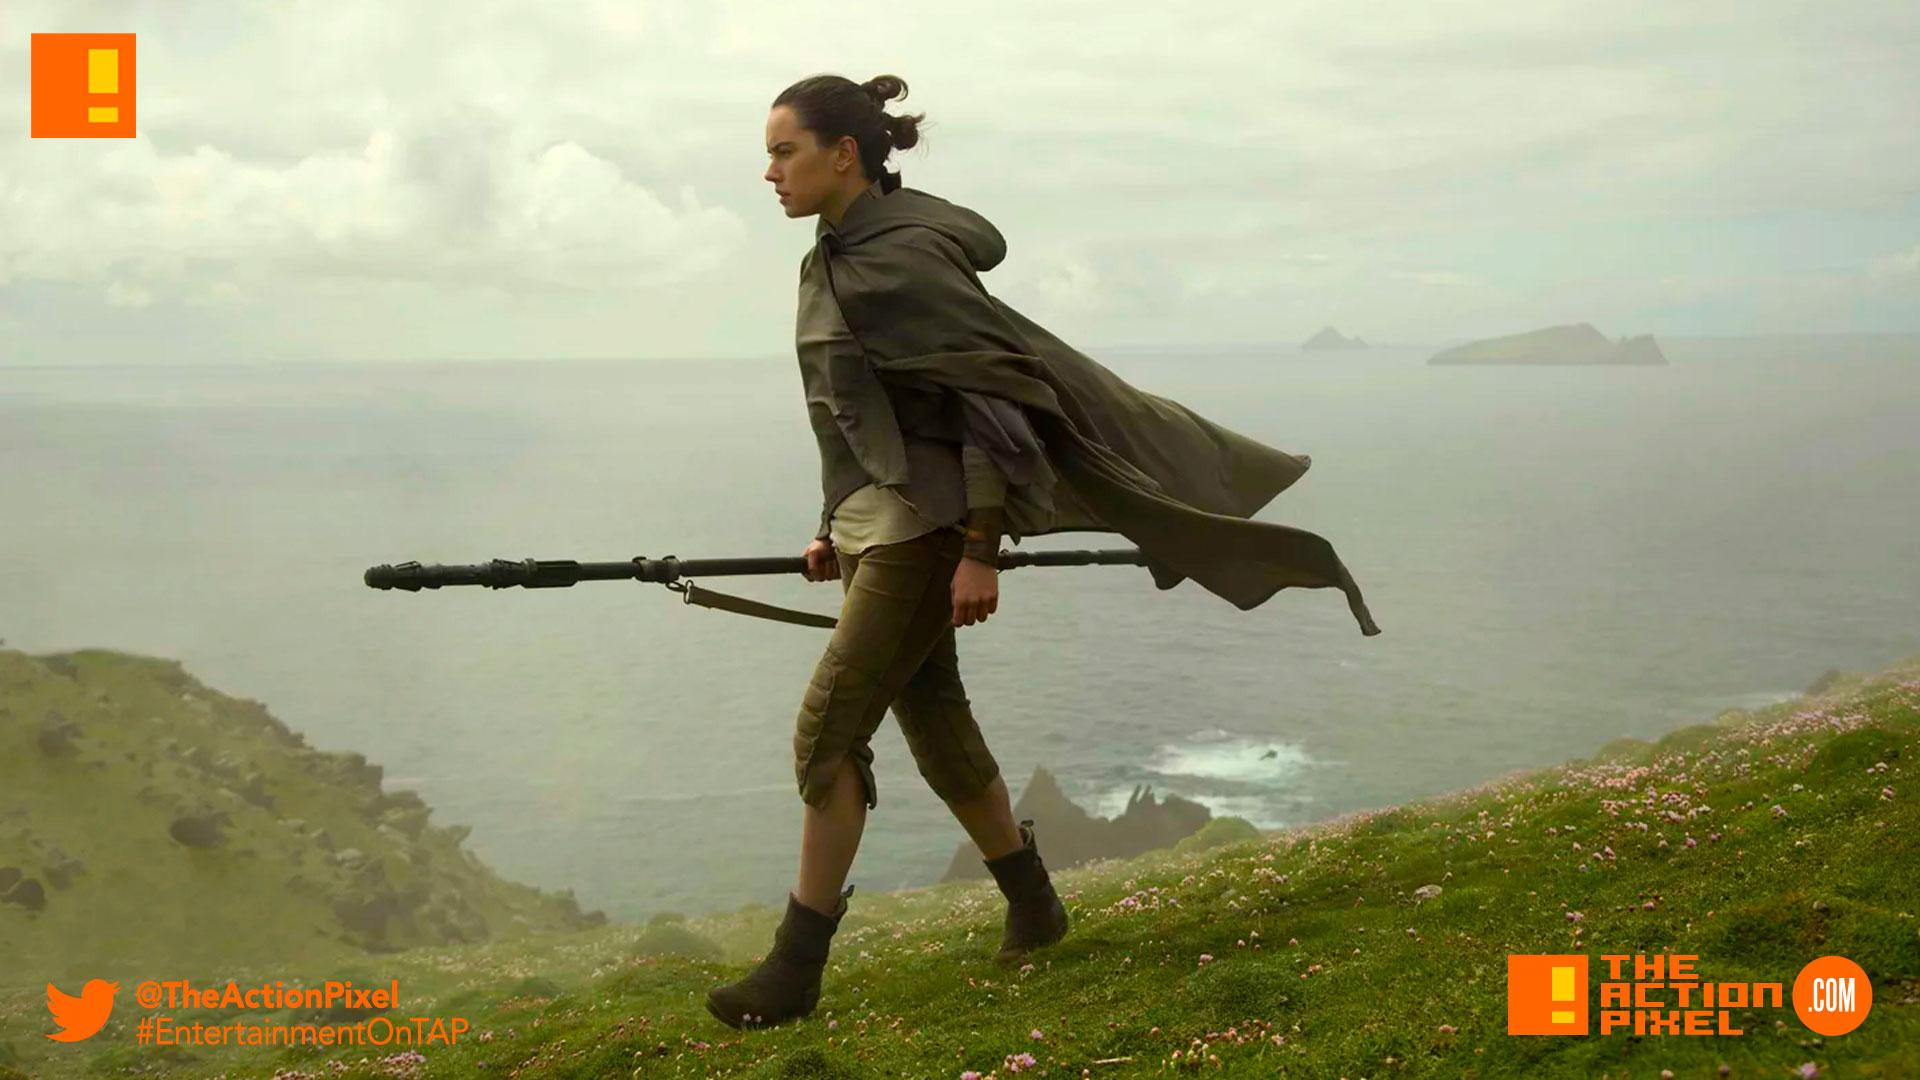 the last jedi, star wars, star wars: the last jedi, mark hamill, luke skywalker, princess leia,carrie fisher, rey,the action pixel, entertainment on tap,kylo ren, photographs,image,